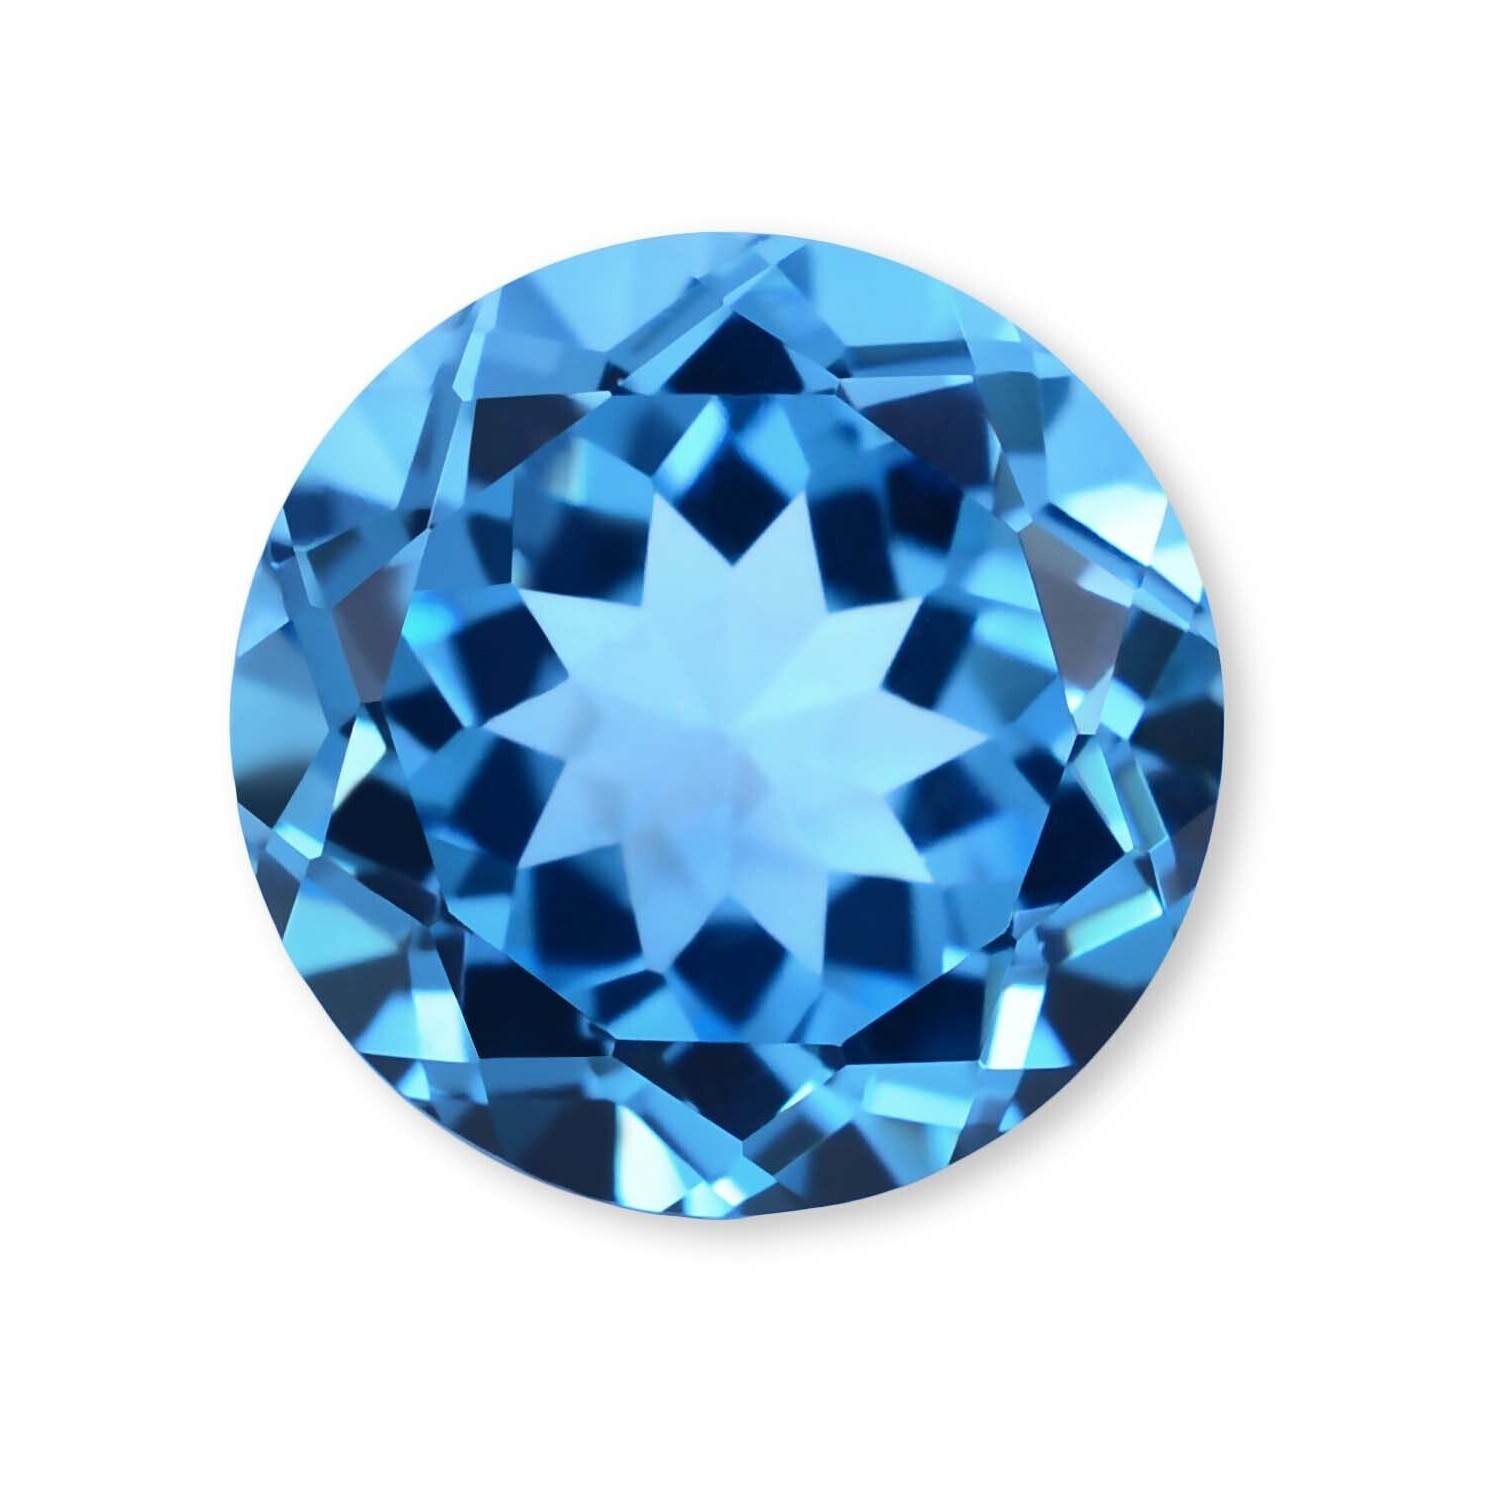 MAN MADE BLUE TOPAZ 9 MM ROUND CUT BEAUTIFUL COLOR AAA 